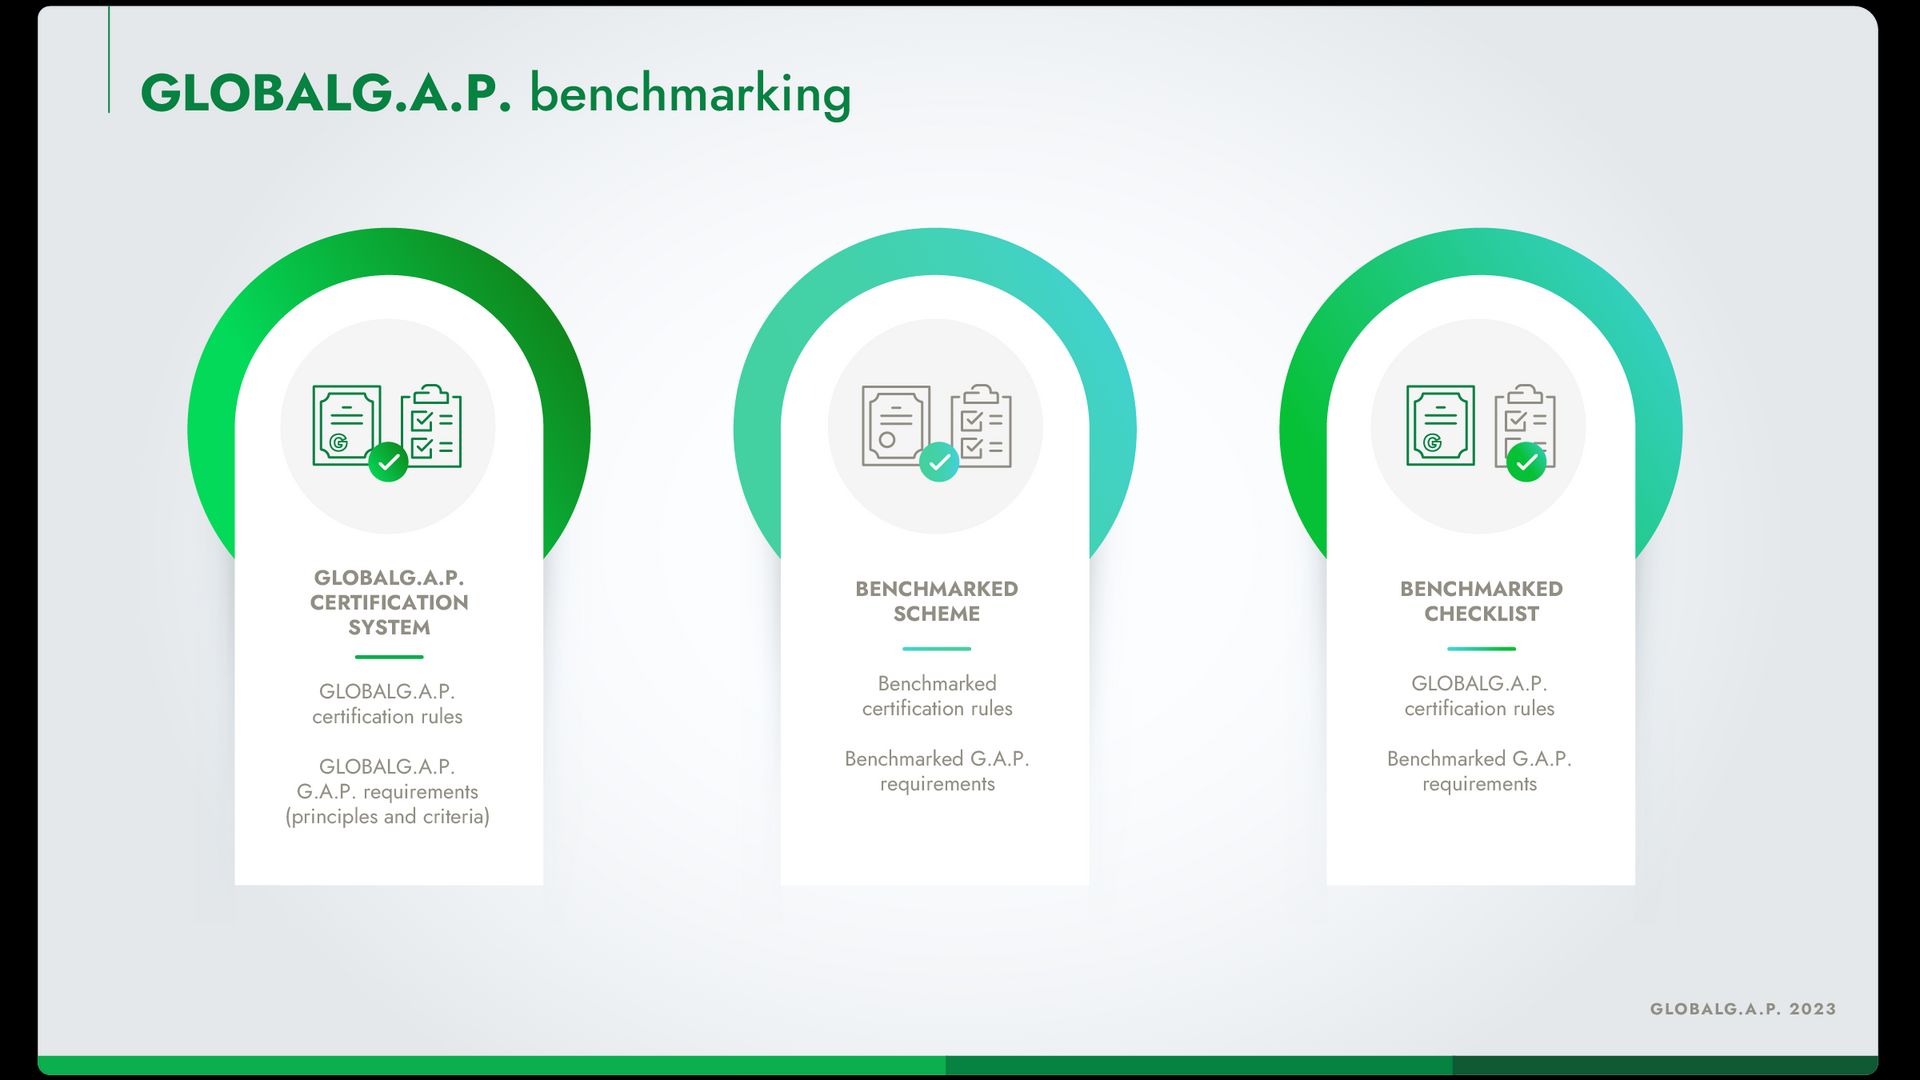 Infographic showing benchmarked schemes and benchmarked checklists